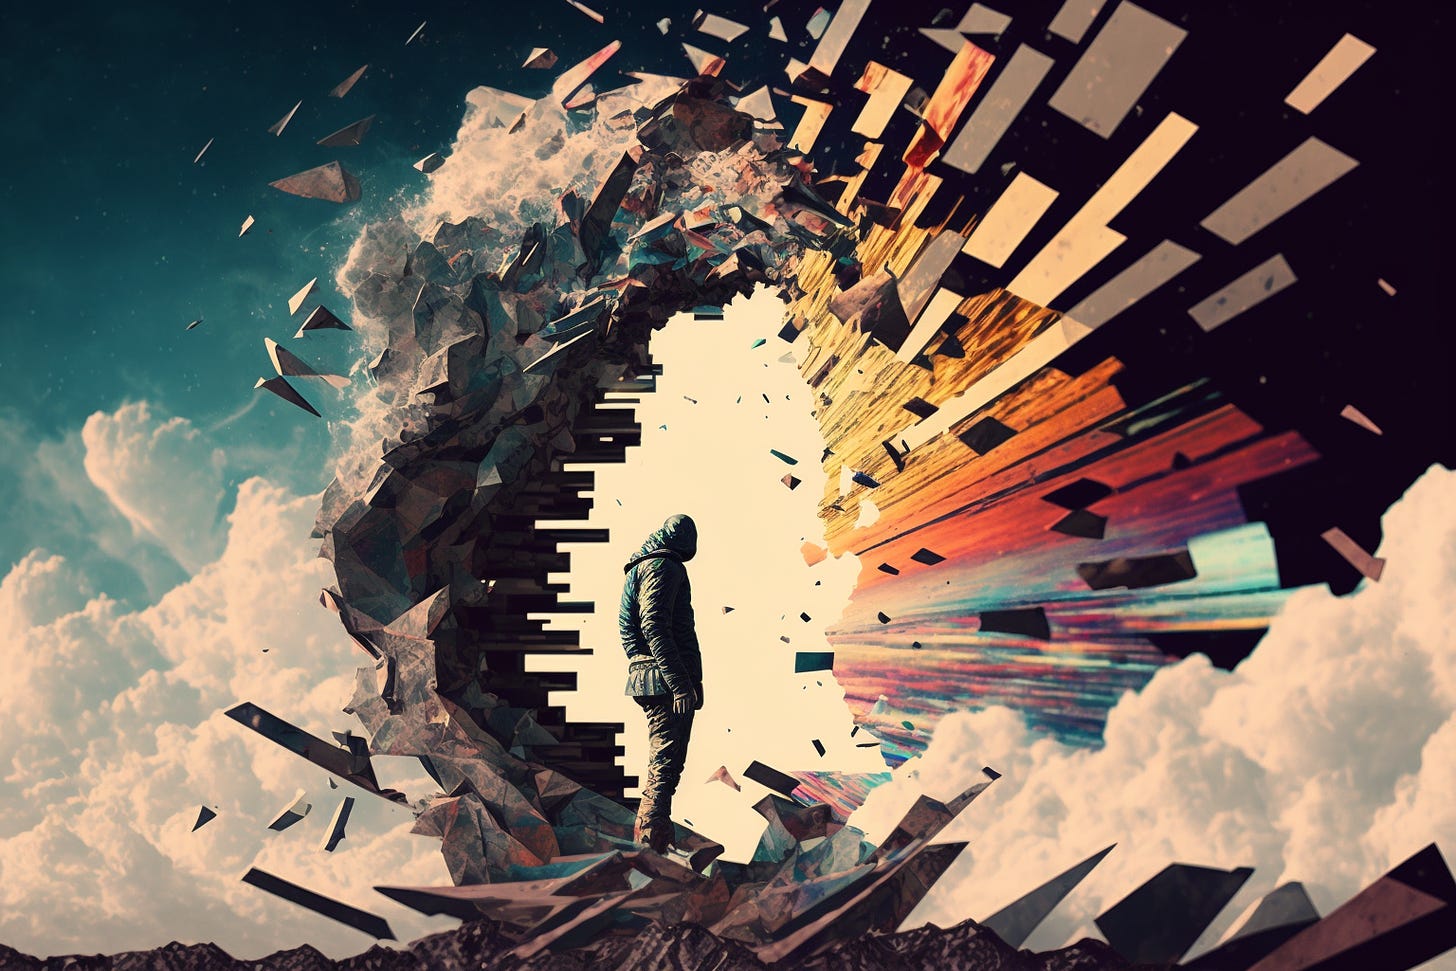 Midjourney-generated image of man standing amidst chaotic explosion of digital glitch art elements and clouds with rainbow motifs